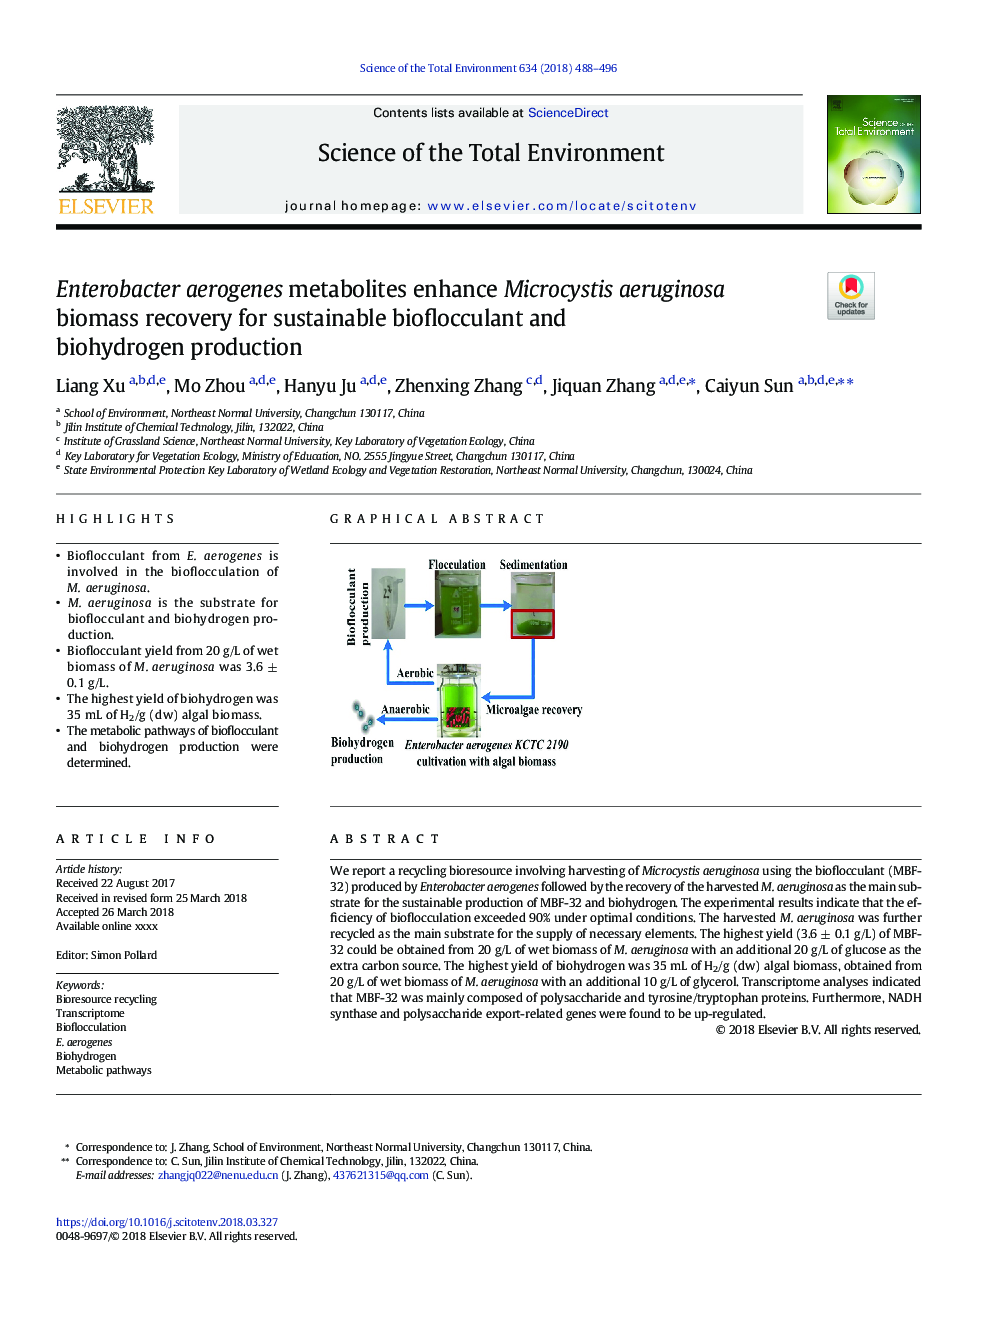 Enterobacter aerogenes metabolites enhance Microcystis aeruginosa biomass recovery for sustainable bioflocculant and biohydrogen production